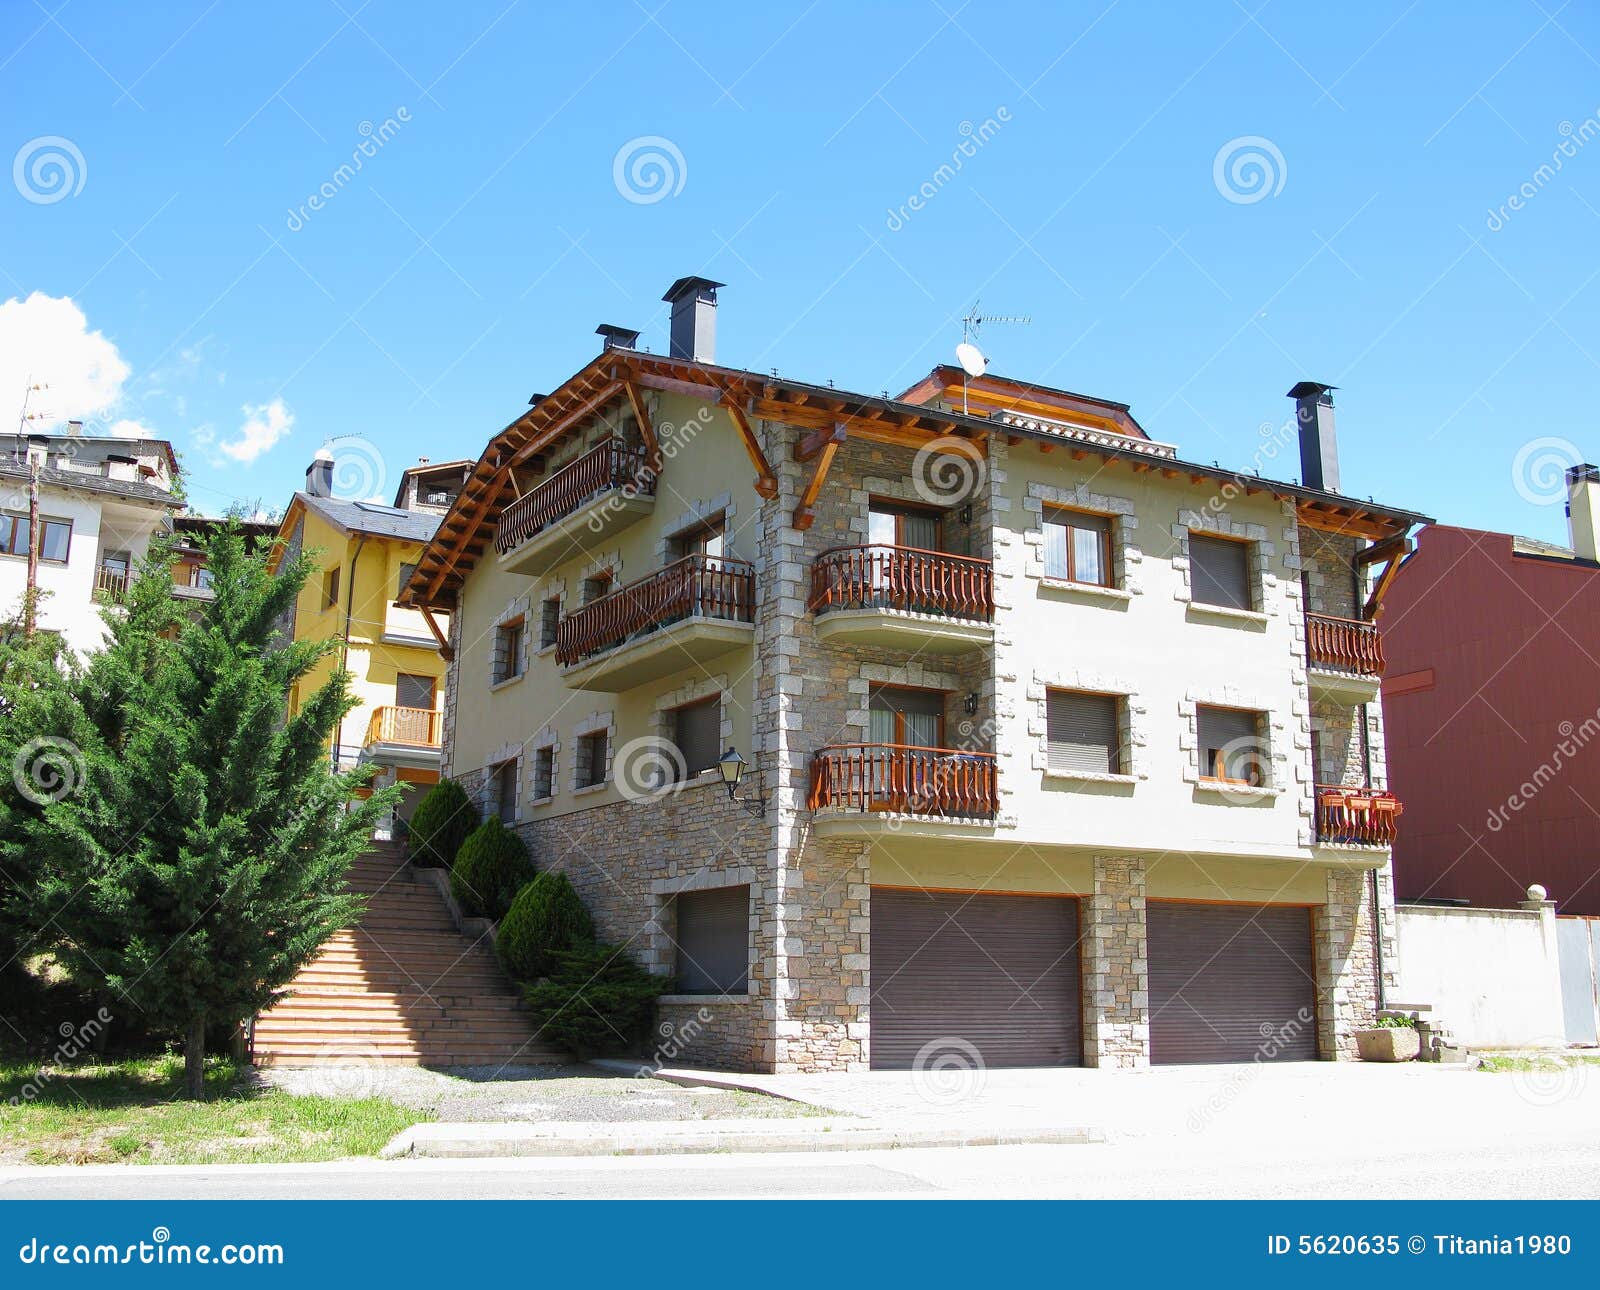 House with balconies stock image. Image of building, exterior - 5620635